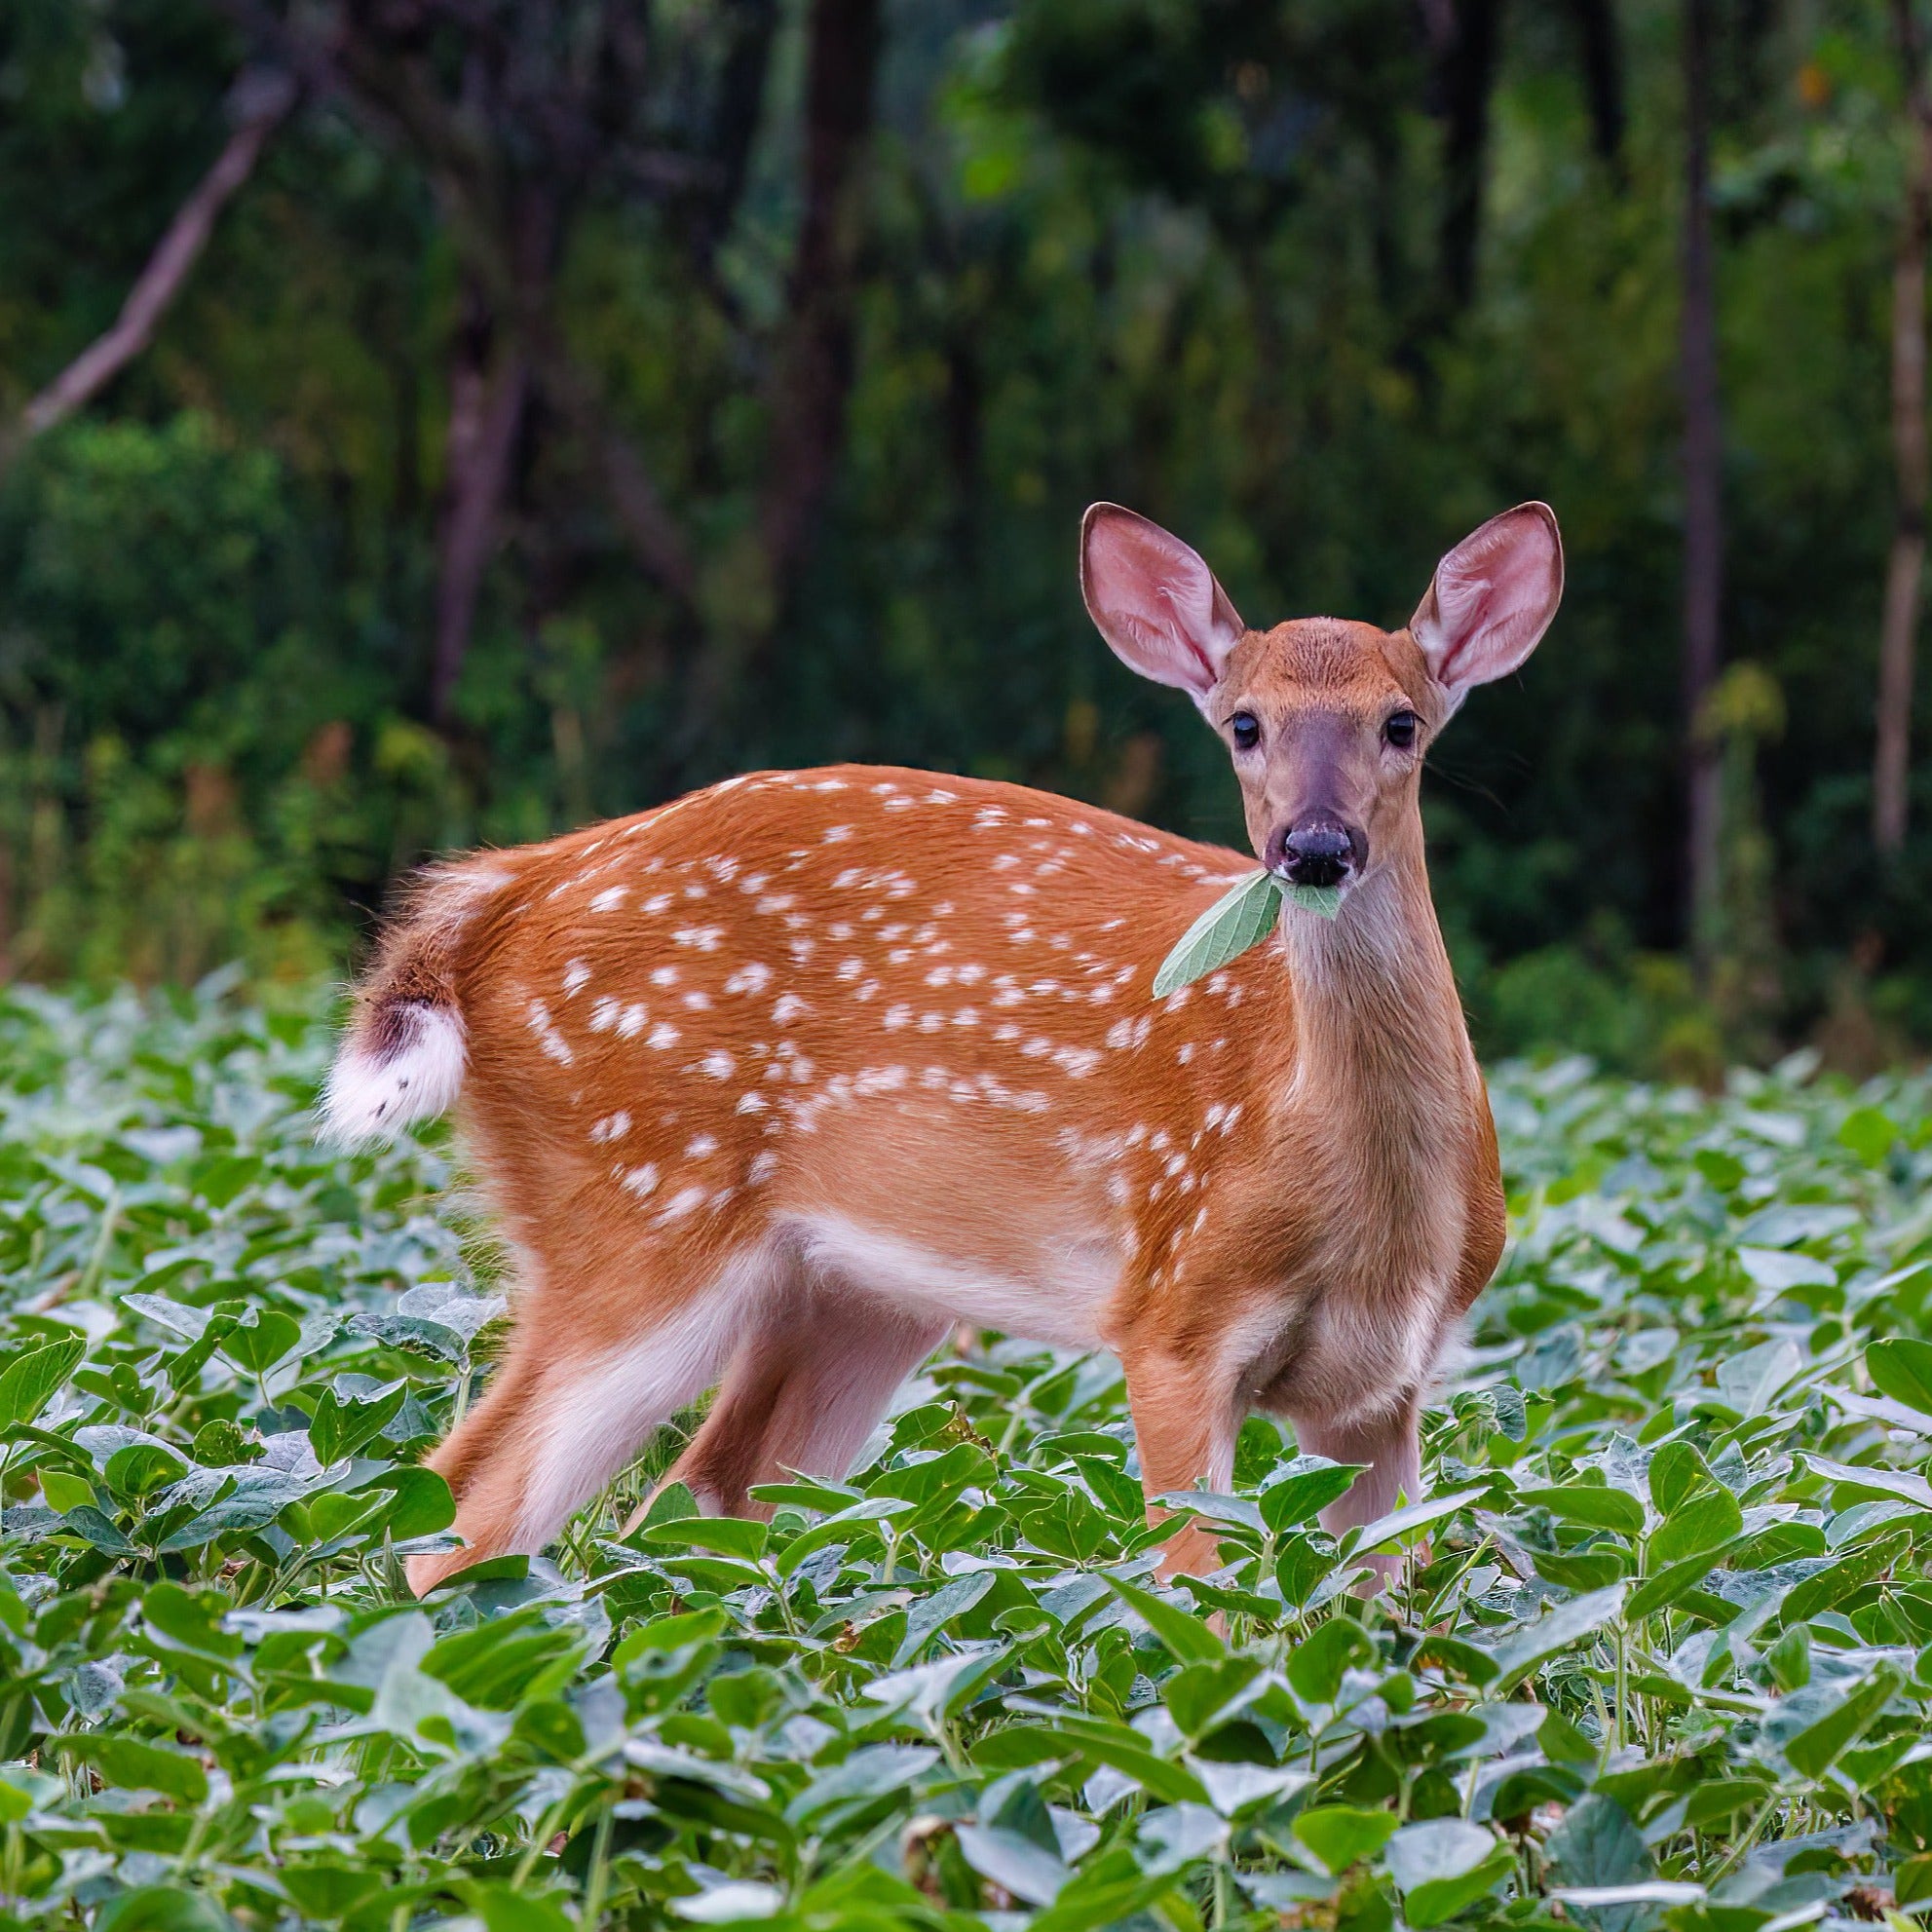 Young White tail deer fawn grazing in Tecomate Glyphosate tolerant soy bean seed field.